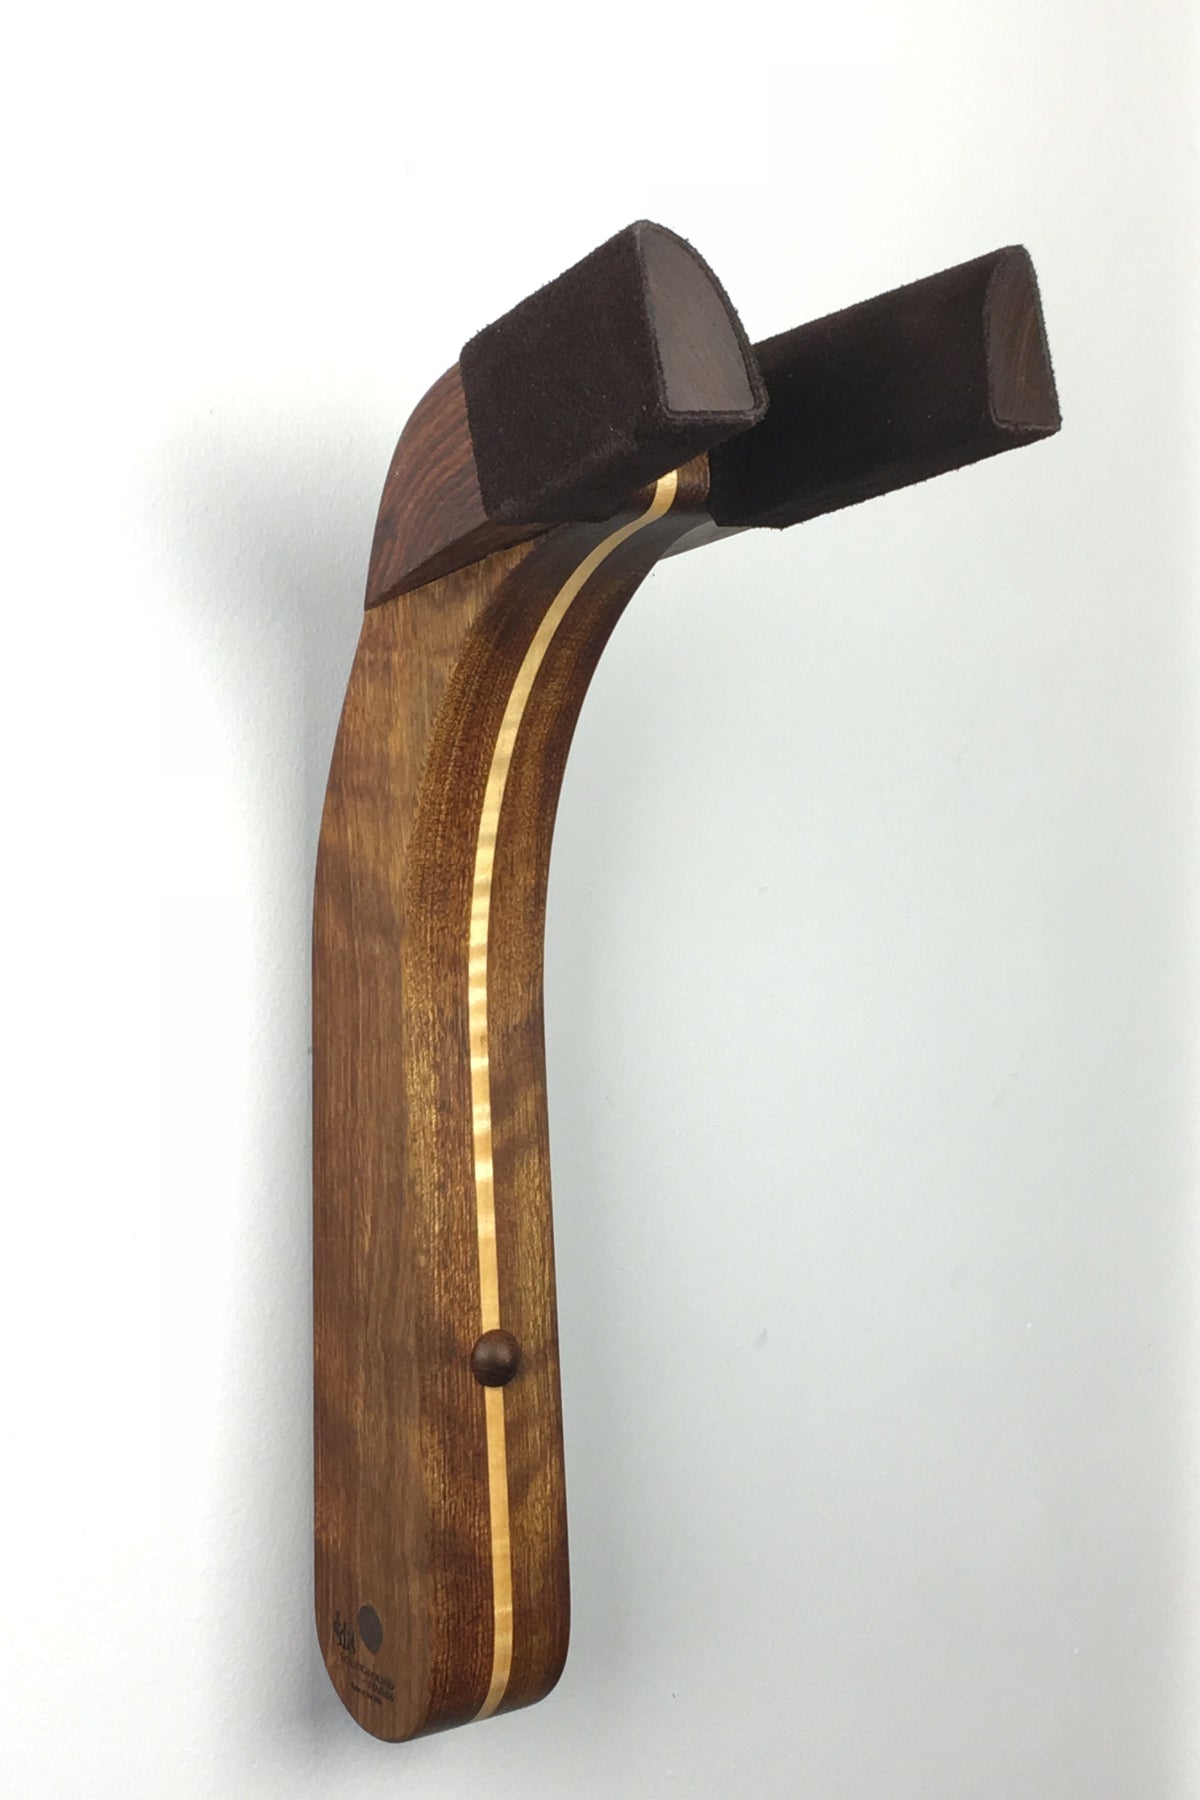 Chechen Caribbean rosewood and curly maple wood guitar wall mount hanger